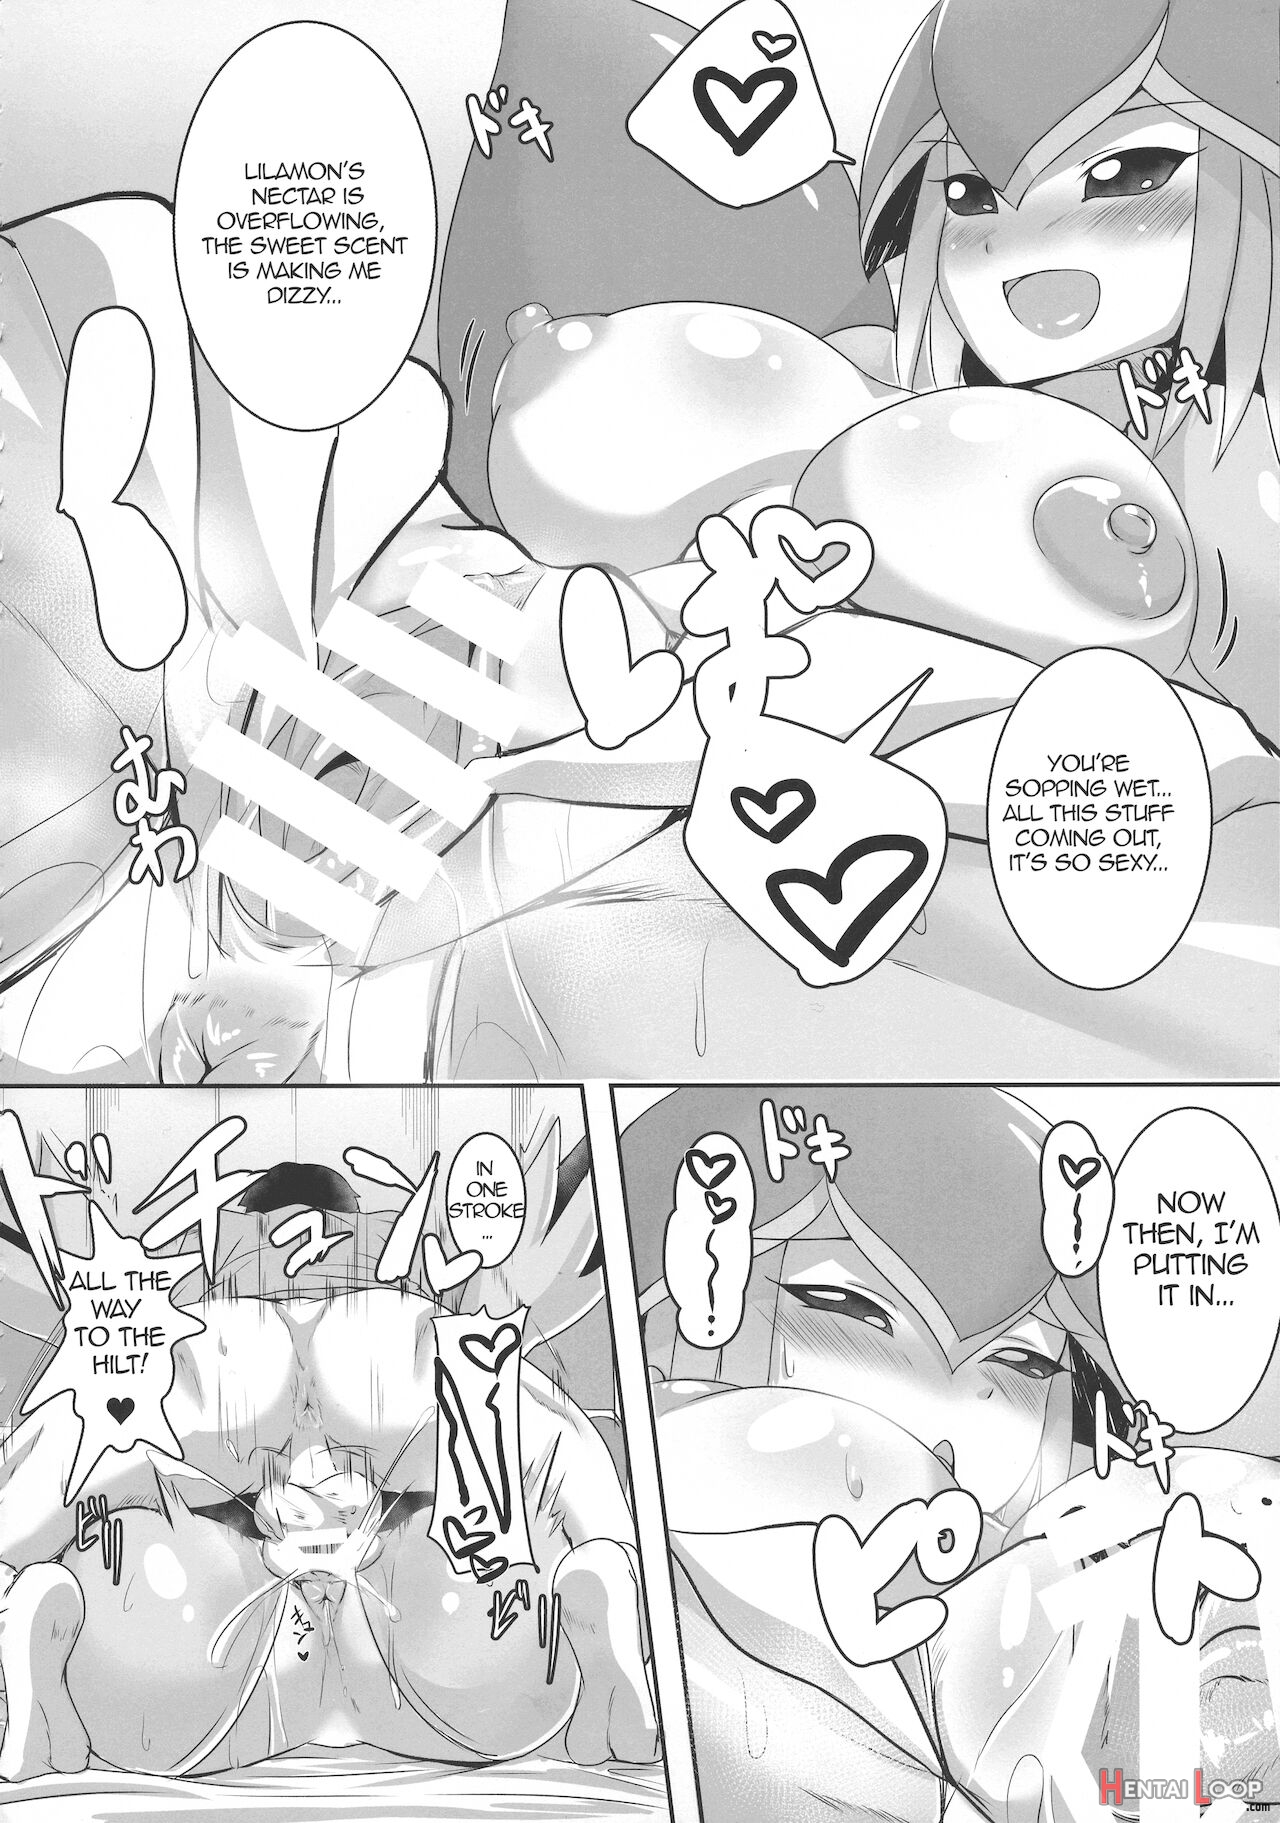 Lovey-dovey Sex Life With Lilamon Evolution! page 6